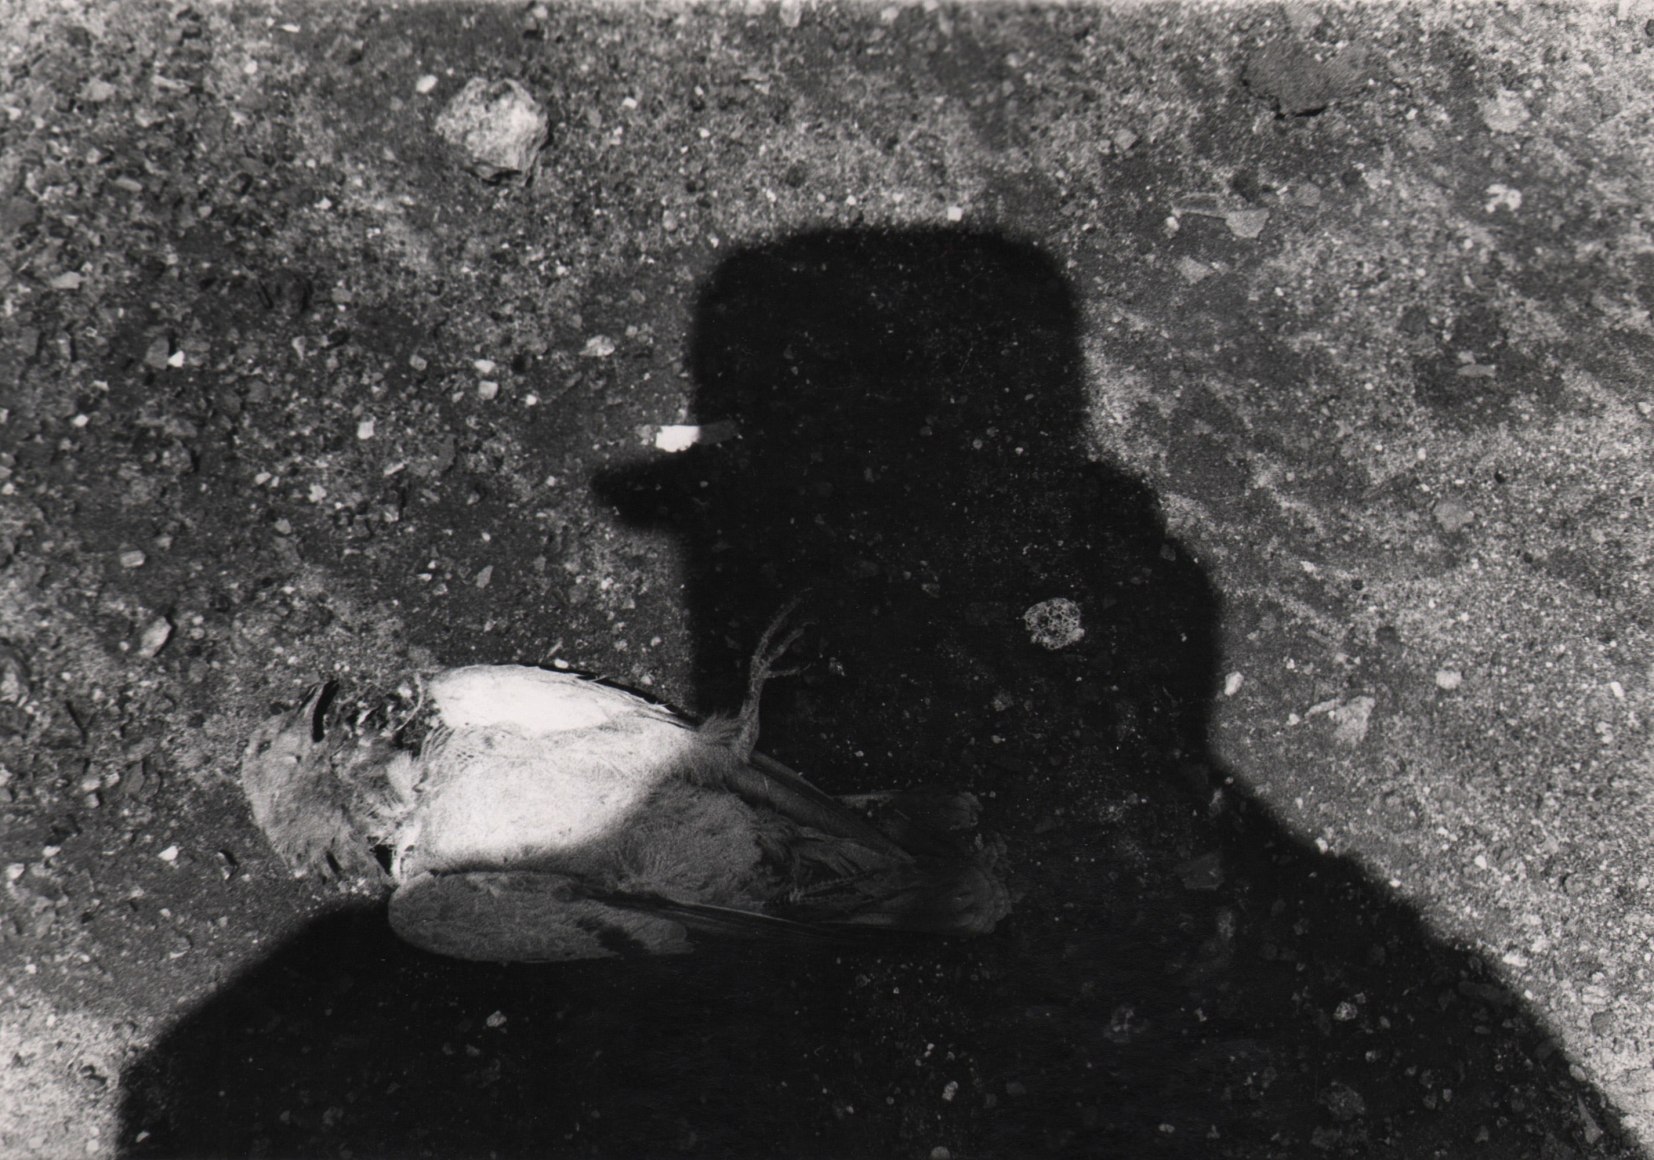 34. Beuford Smith, Pigeon &amp; Self Portrait, ​1972. Shadow of the photographer against the ground with a dead pigeon.